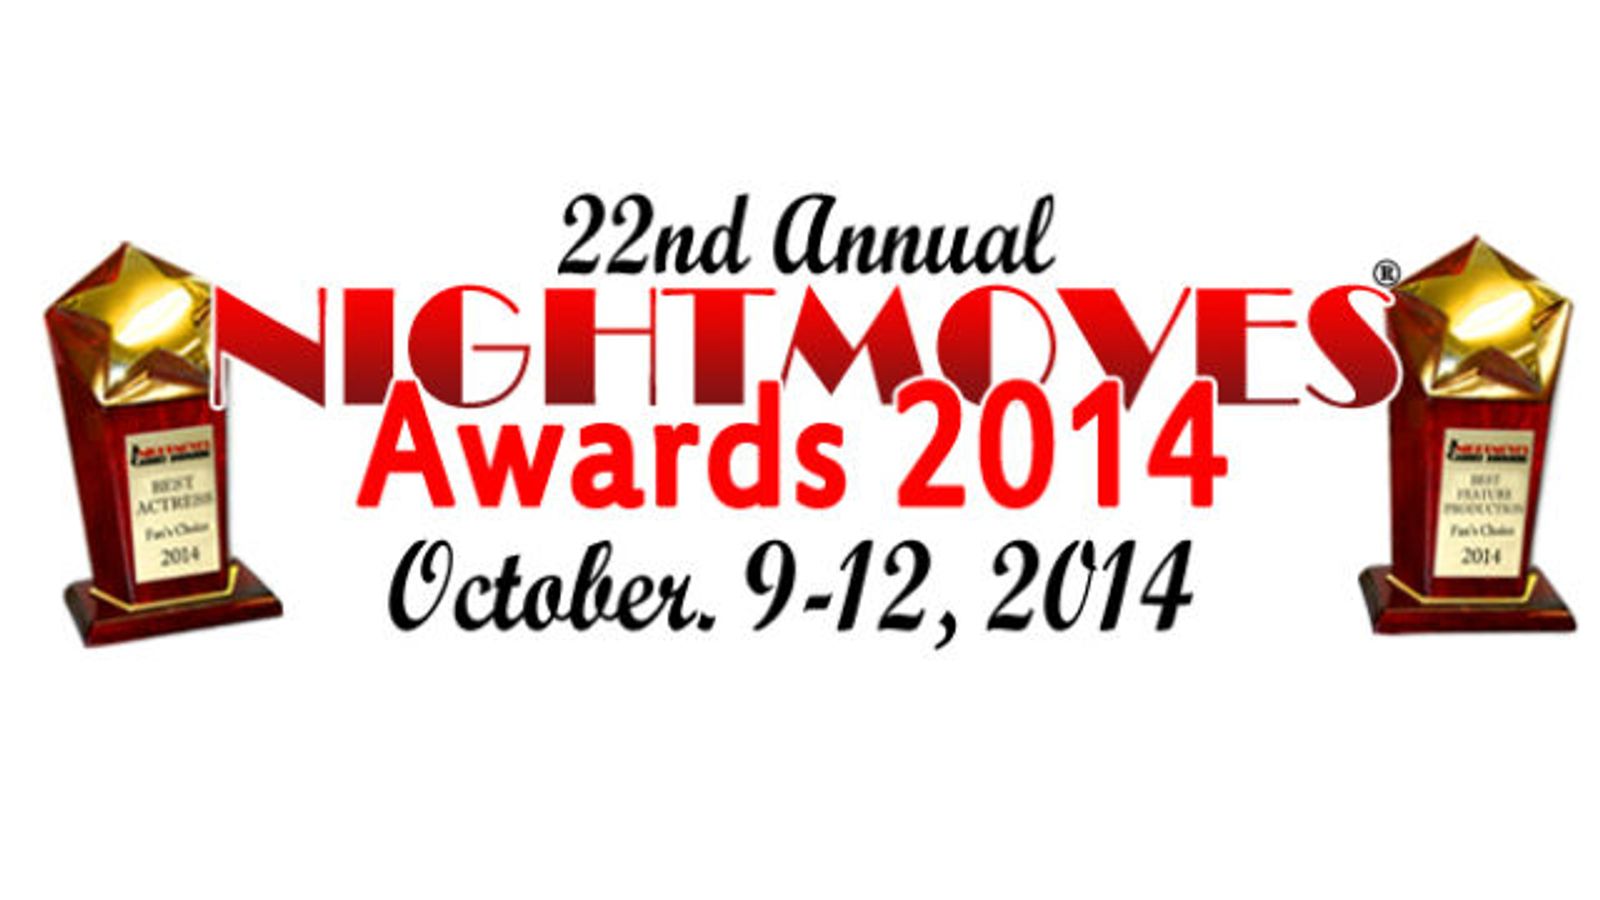 NightMoves Awards Issues Call for Sponsors for 22nd Annual Show